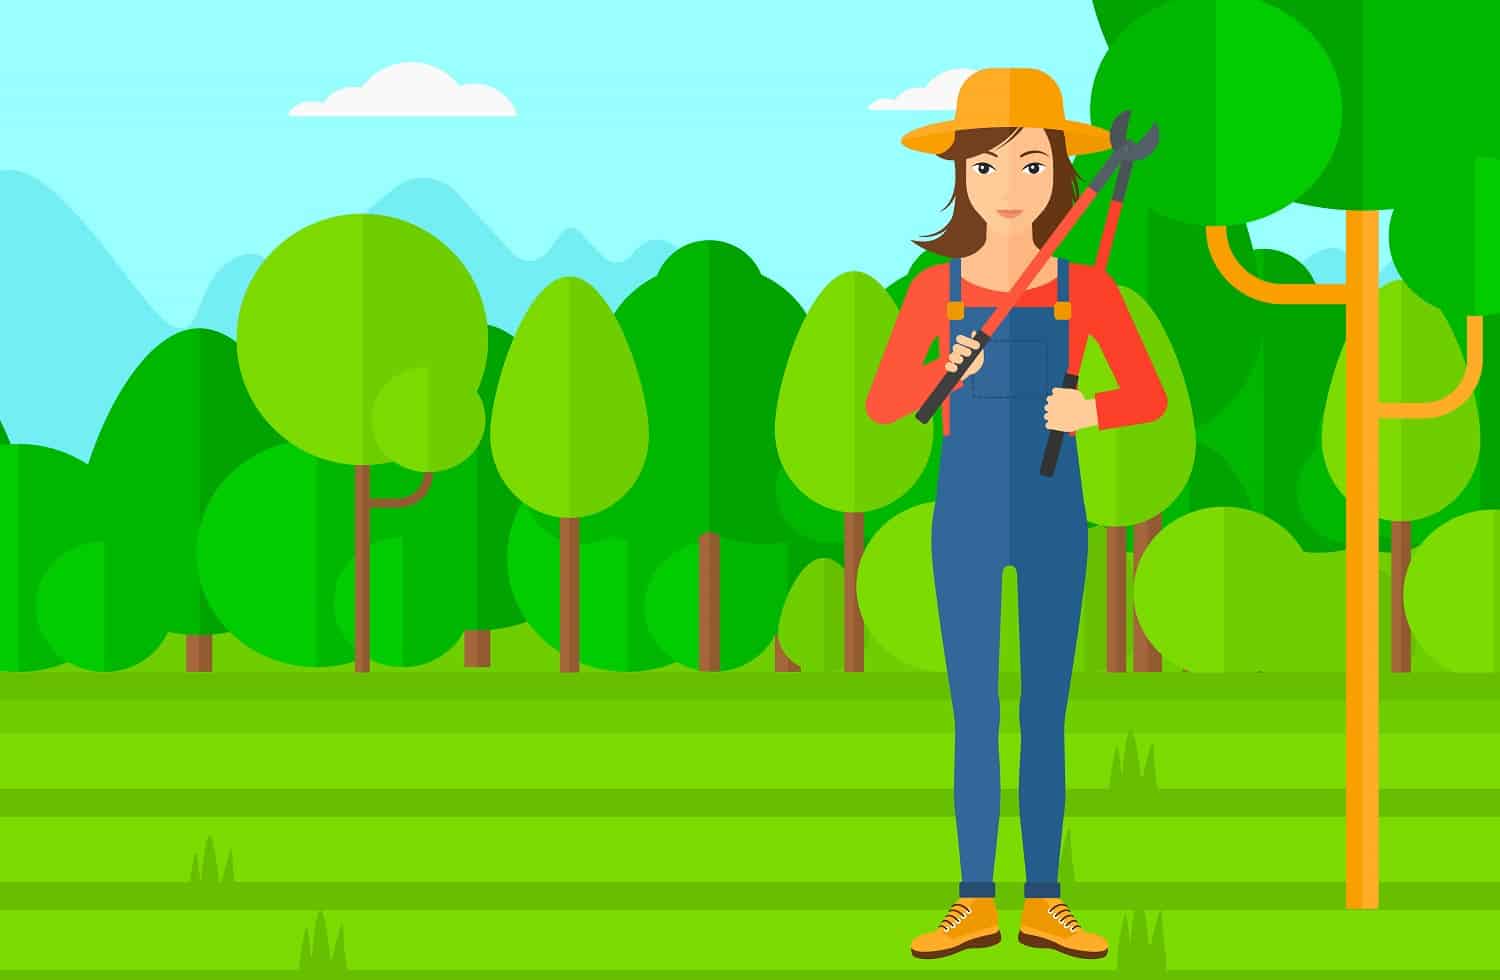 A woman holding a pruner on a background of garden with trees vector flat design illustration. Horizontal layout.